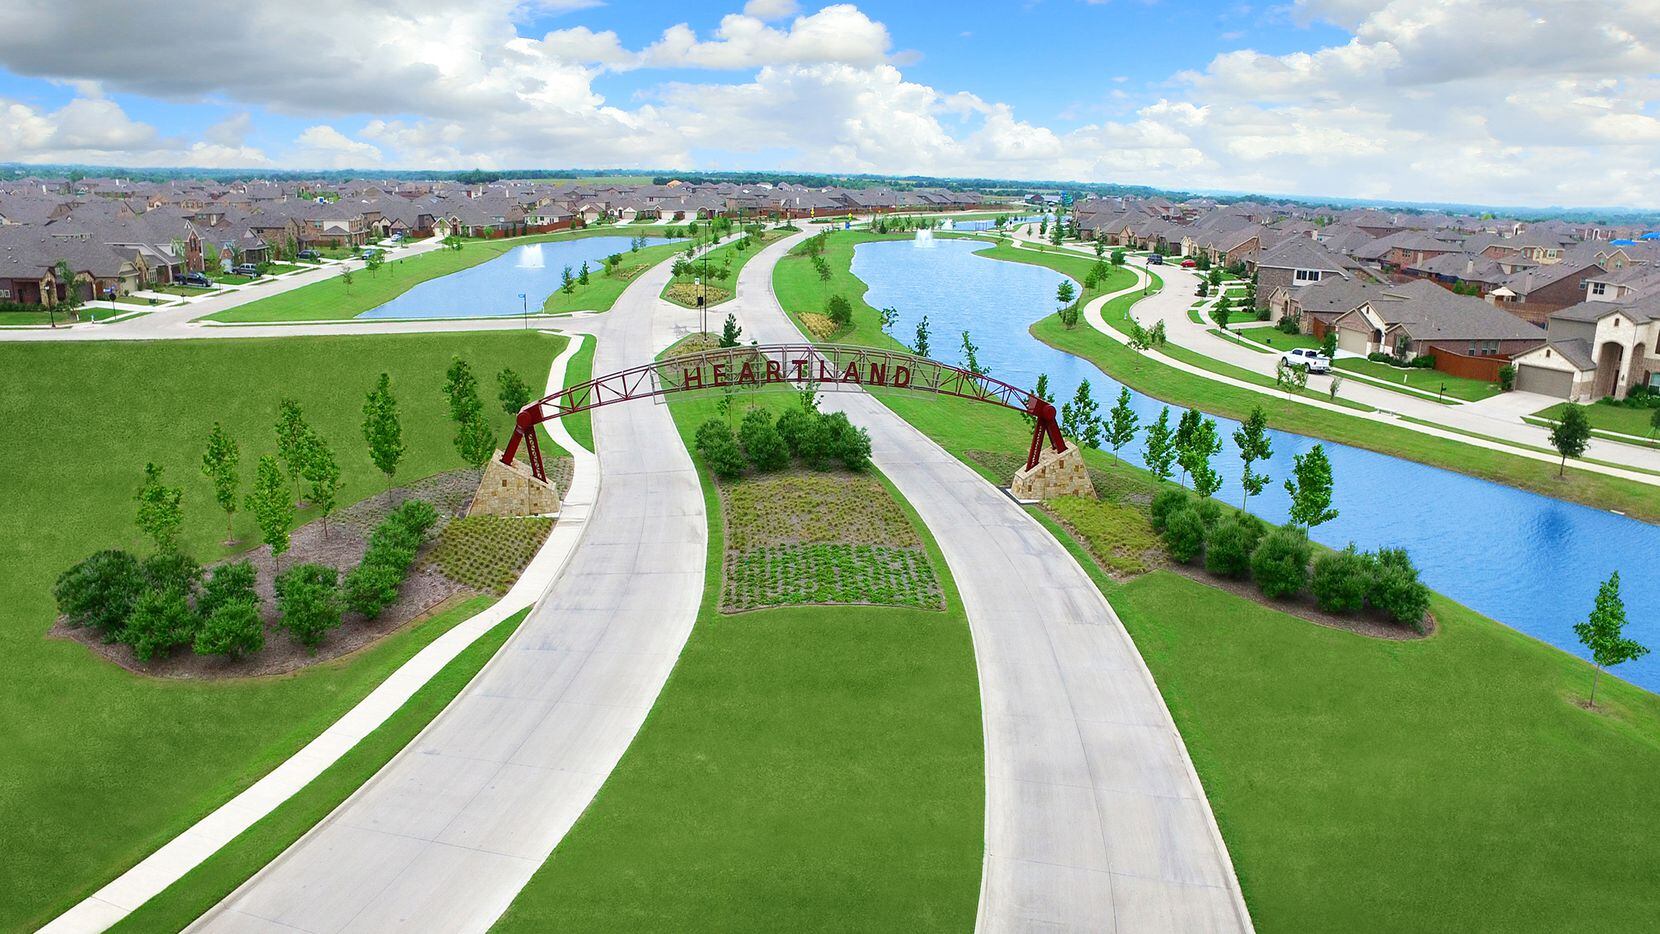 Heartland, located 25 miles east of Downtown Dallas, has more than 400 acres of parks,...